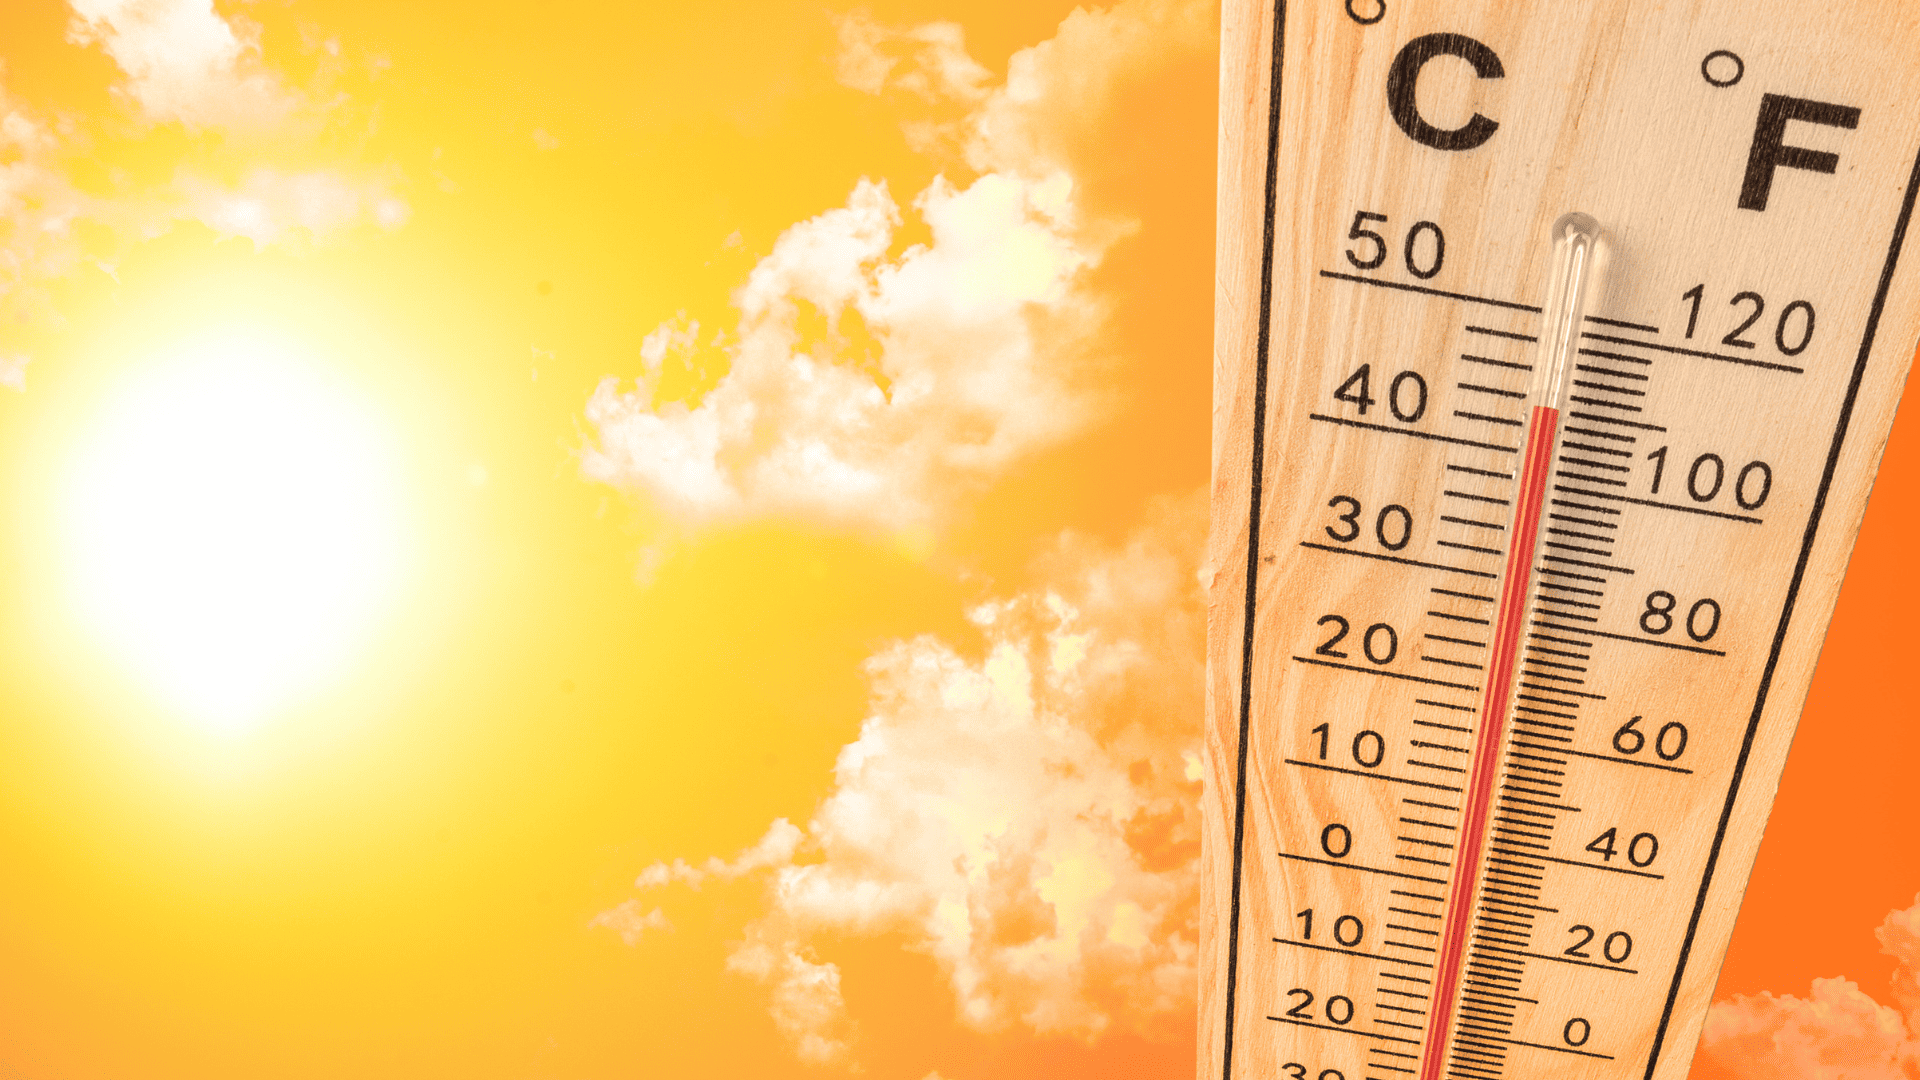 Thermometer showing 110 degrees with the bright sun on the left and orange background